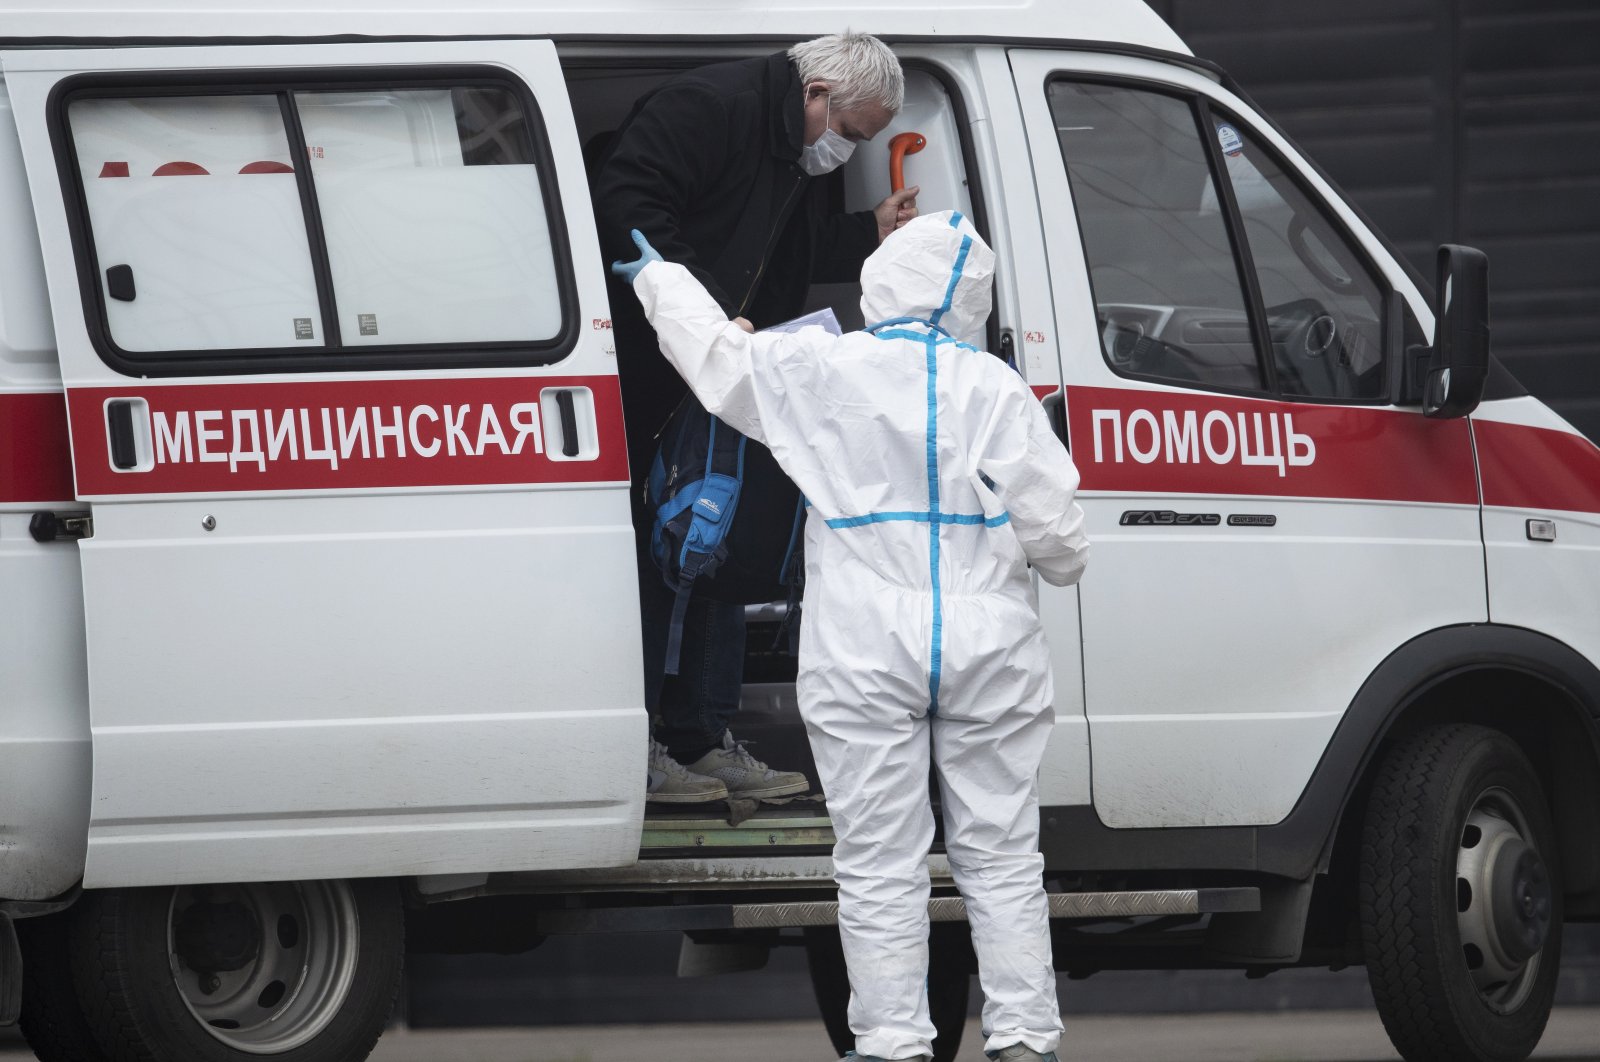 In this April 27, 2020, photo, a medical worker wearing protective gear helps a man, suspected of having the coronavirus infection, to get out from an ambulance at a hospital in Kommunarka, outside Moscow, Russia. (AP Photo)